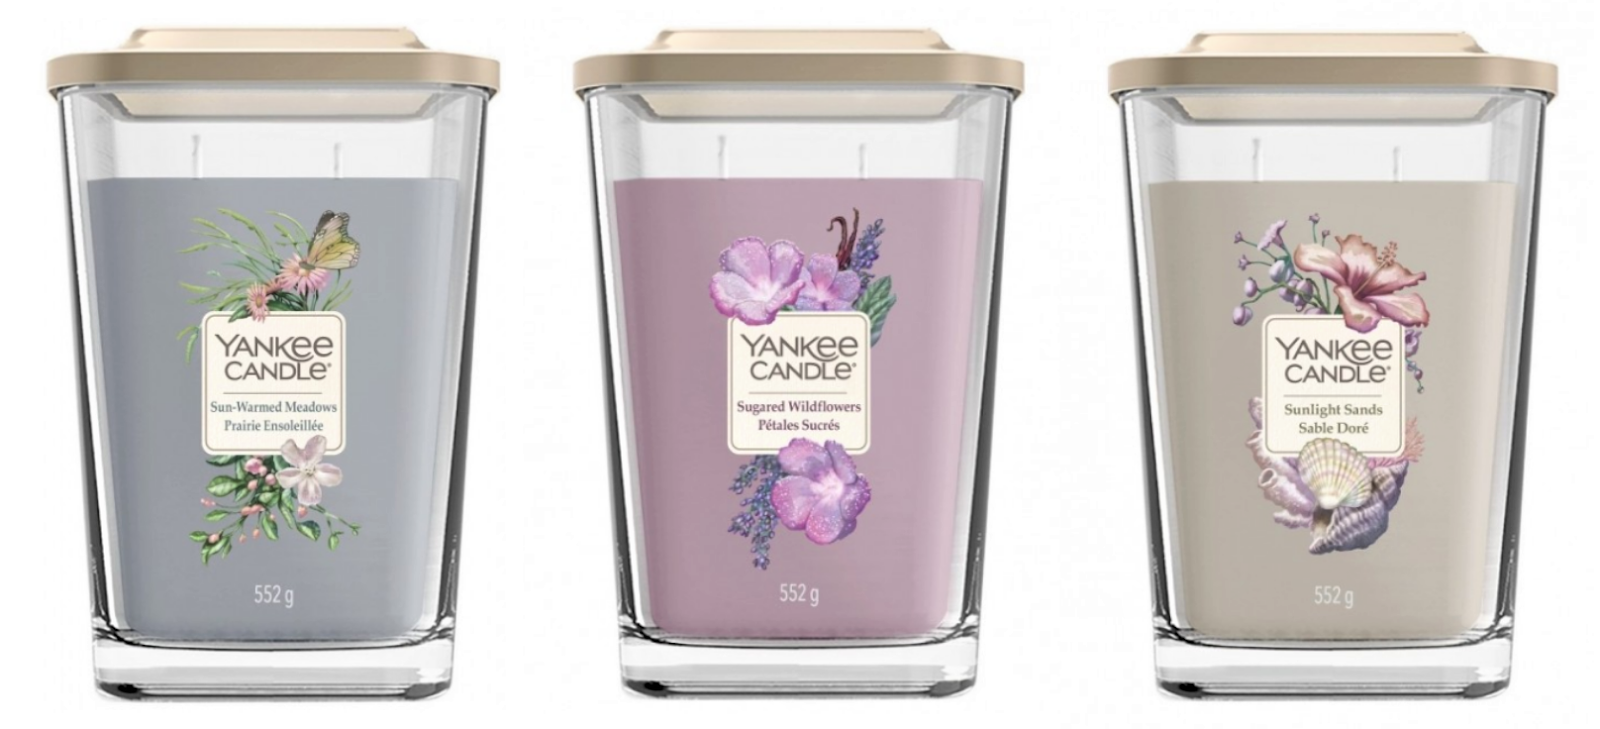 Passionflower-Yankee-Candle